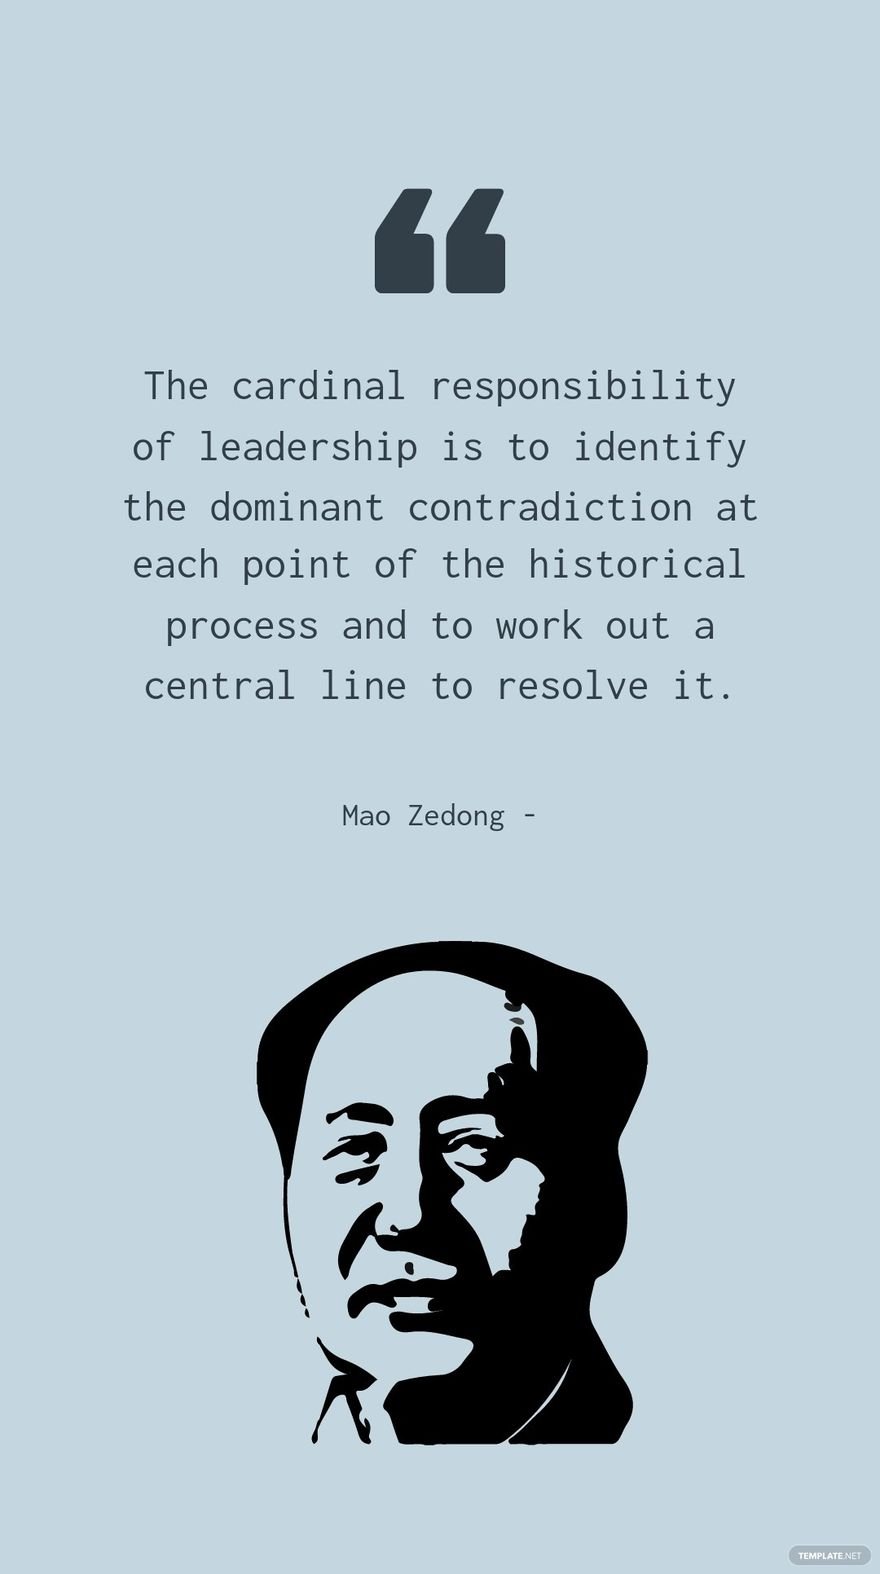 Free Mao Zedong - The cardinal responsibility of leadership is to identify the dominant contradiction at each point of the historical process and to work out a central line to resolve it. in JPG